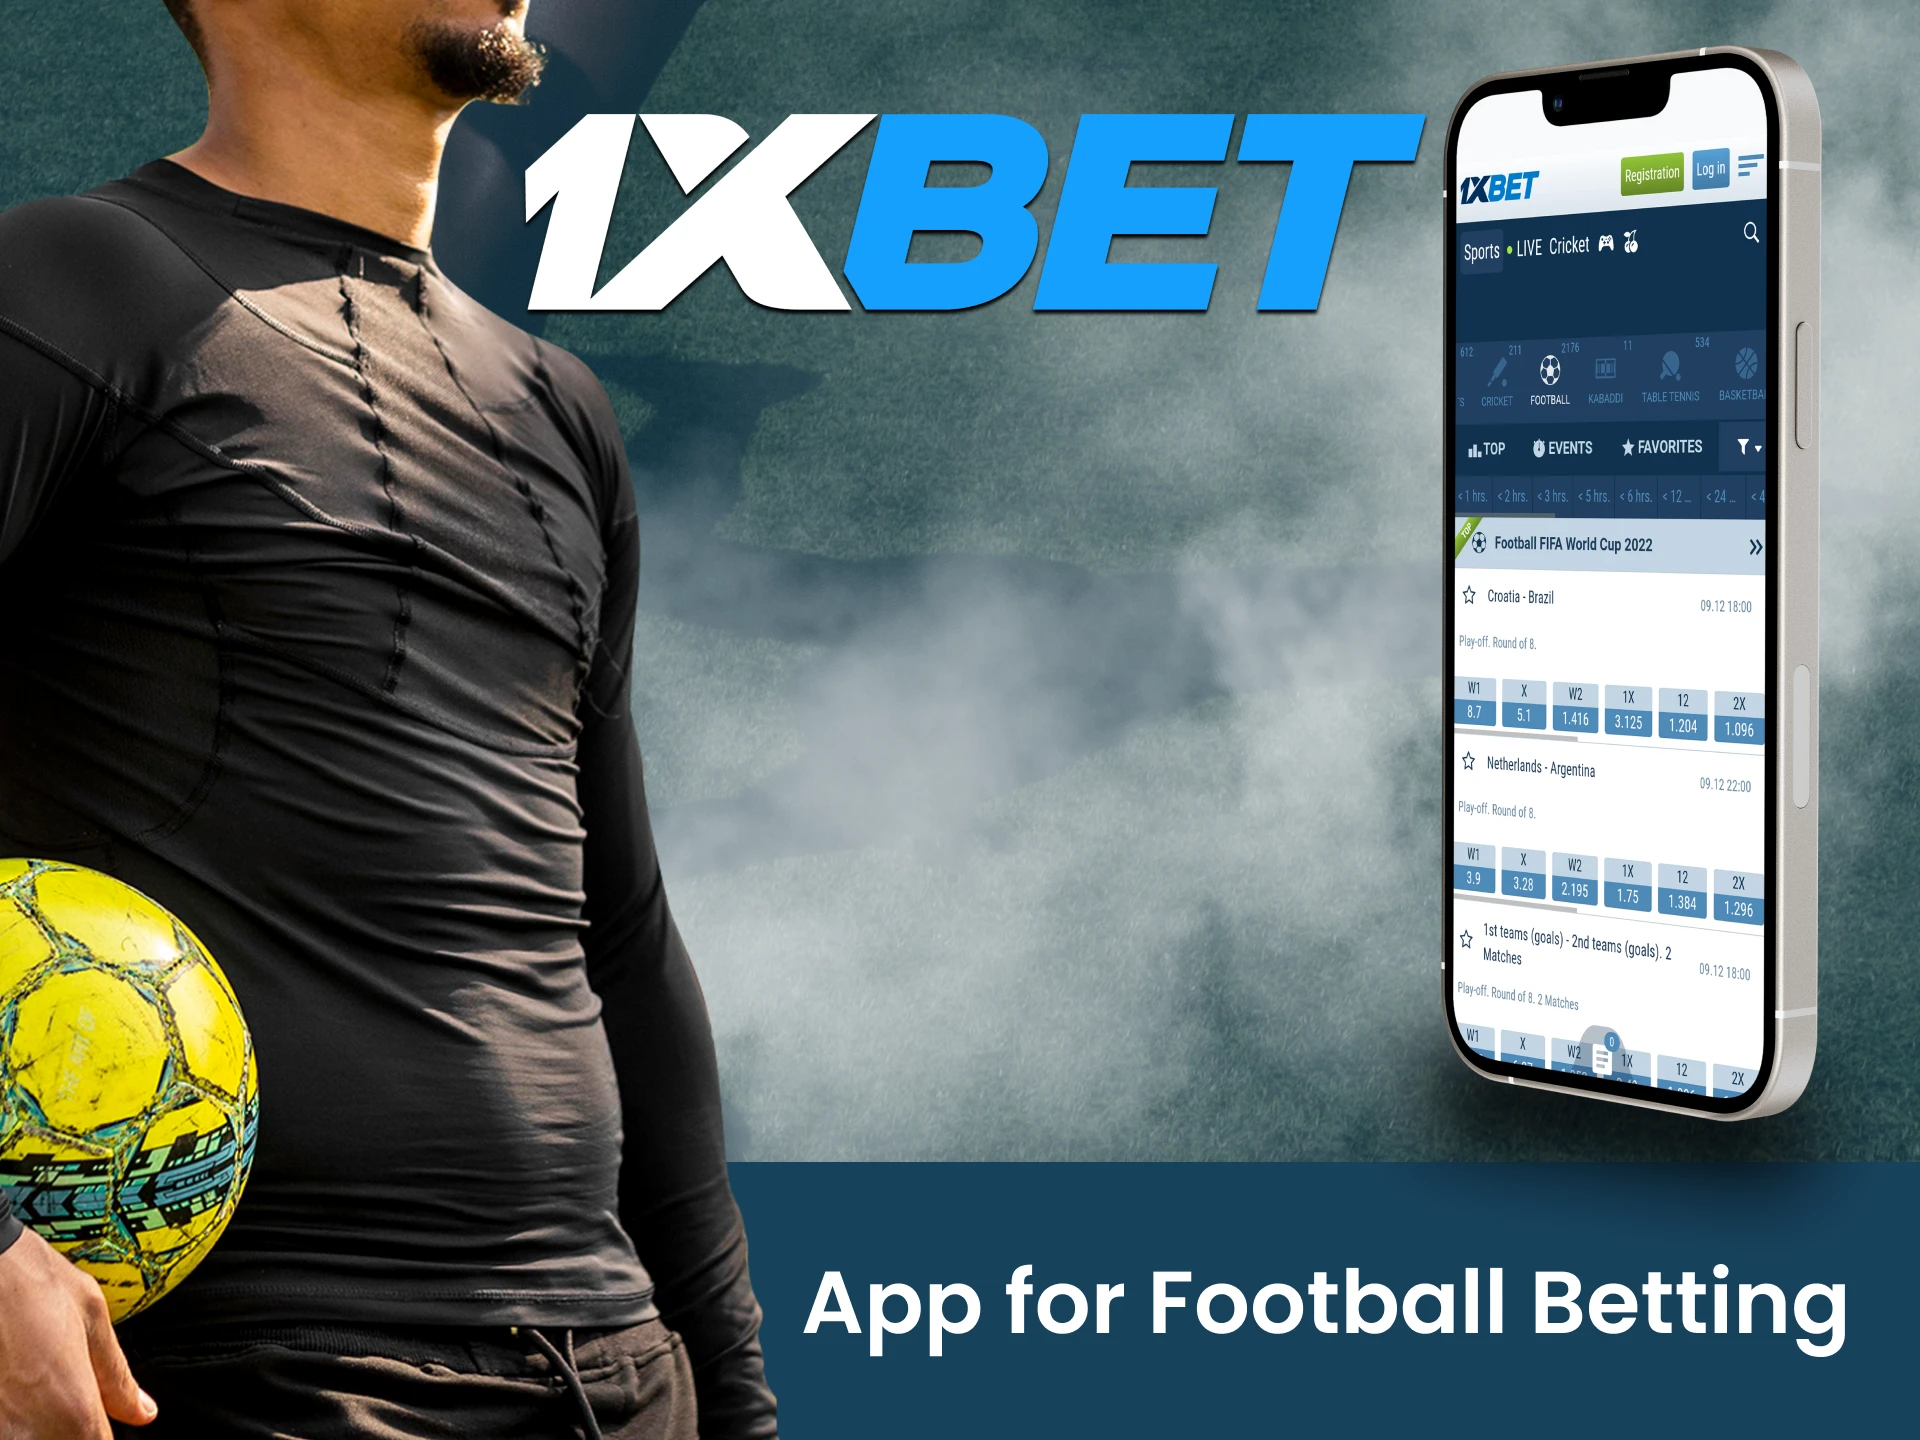 Install the 1xBet app to place bets on football whenever you want.